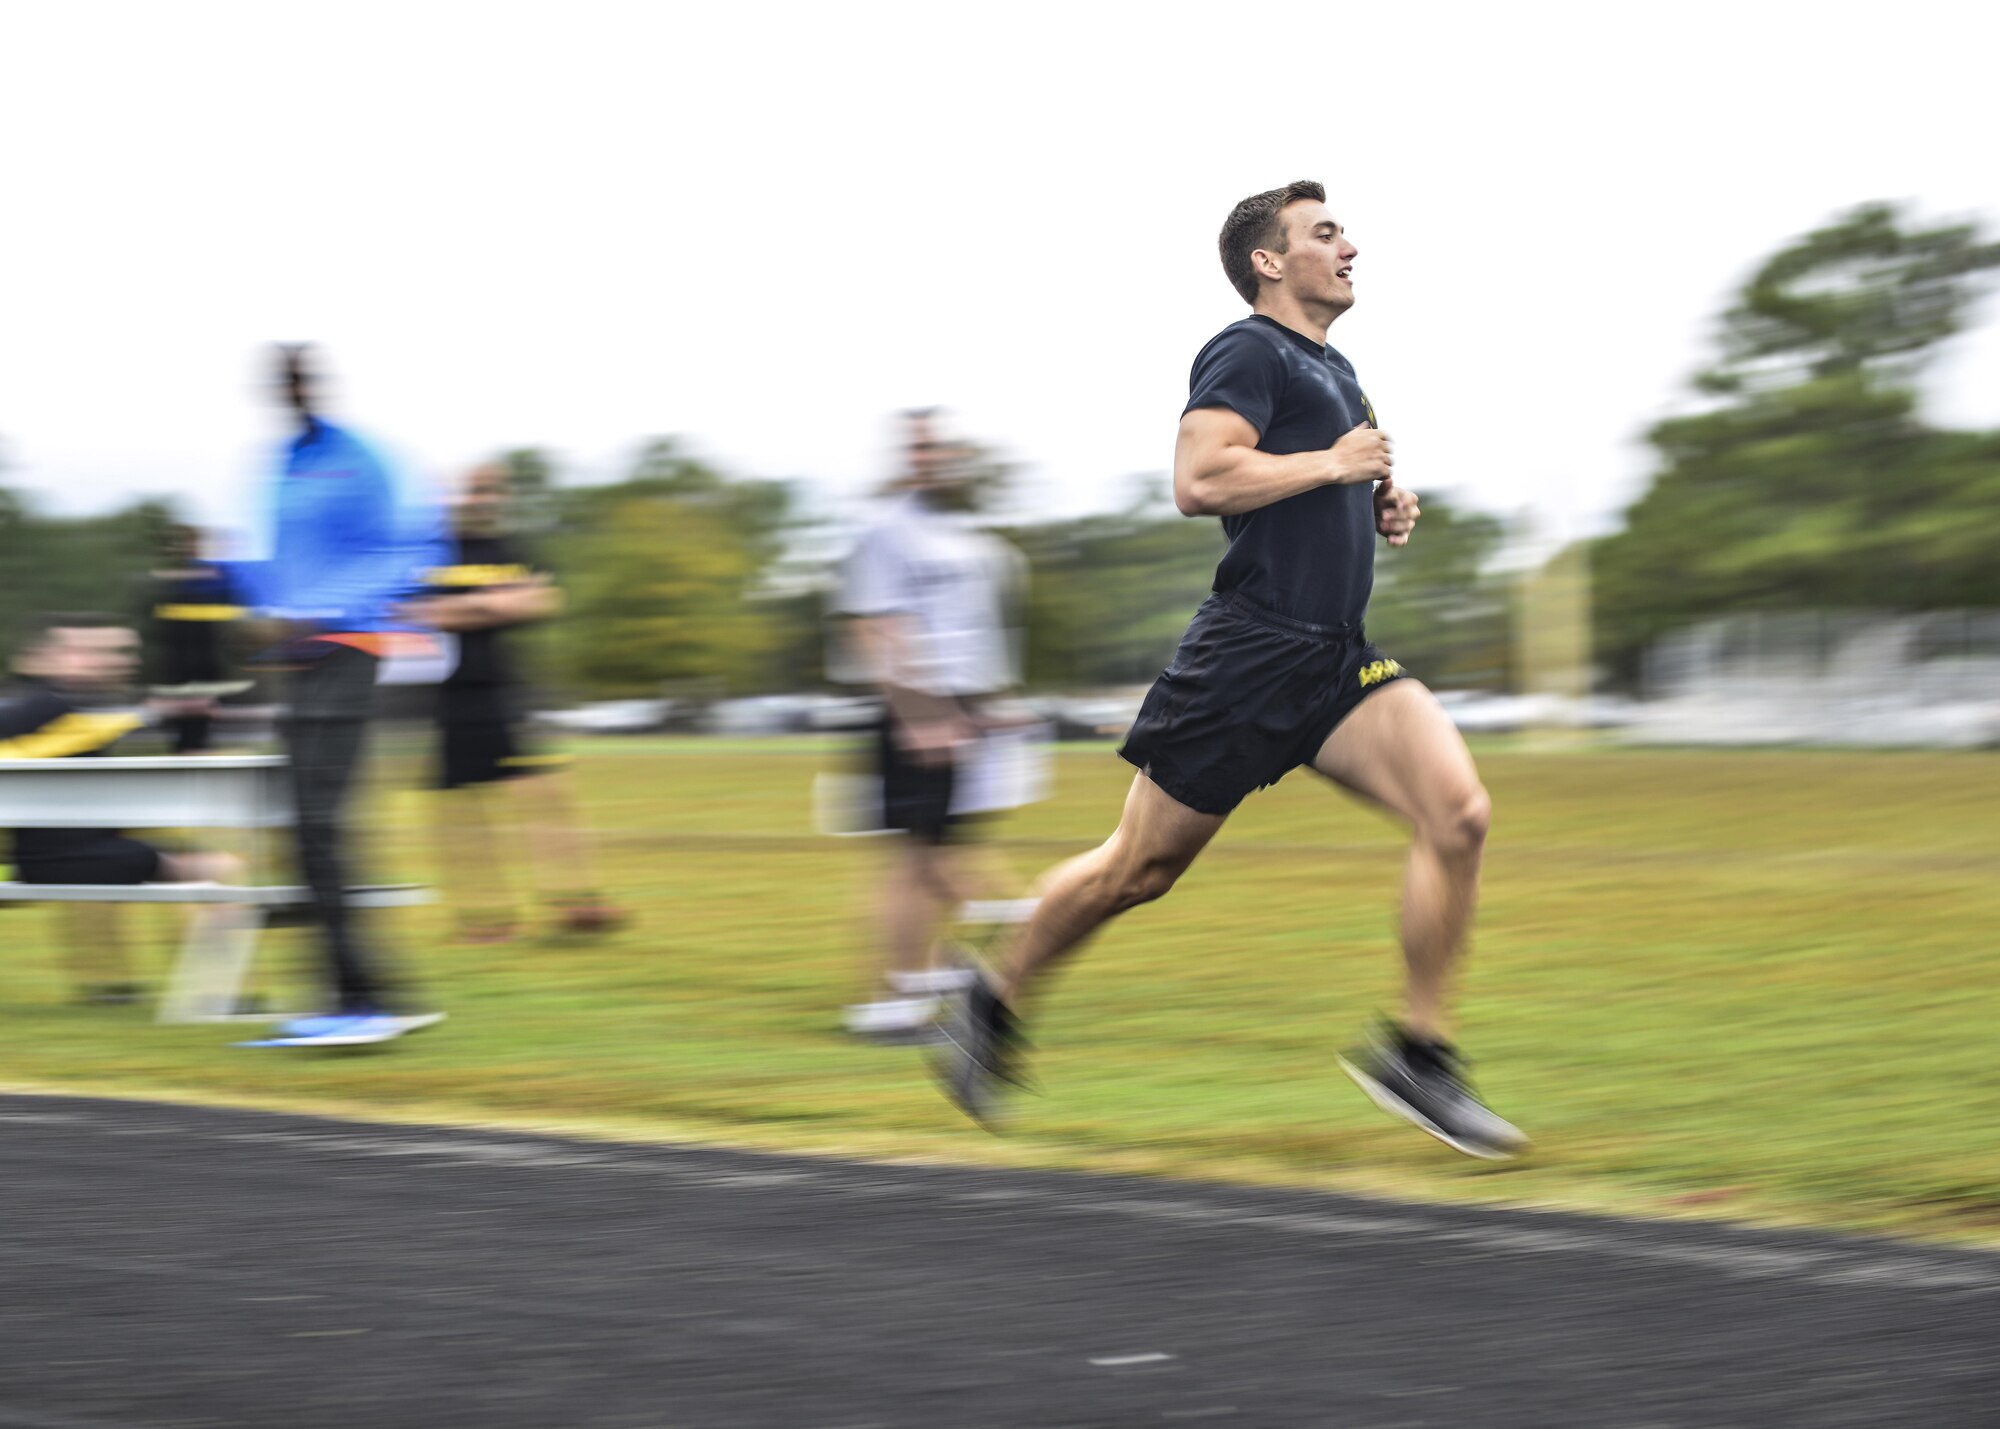 An U.S. Army Soldier sprints the 1,000 meter run, two and a half laps on the track, during the German Armed Forces Badge for military Proficiency event at Joint Base Langley-Eustis, Va., Nov. 1, 2016.  The runner starts at the 200-meter mark and must run two complete laps of the race, the runner’s time is recorded to the second. There is a bronze, silver and gold ranking system used from the total of all six events.  (U.S. Air Force photo/Tech Sgt. Daylena S. Ricks)